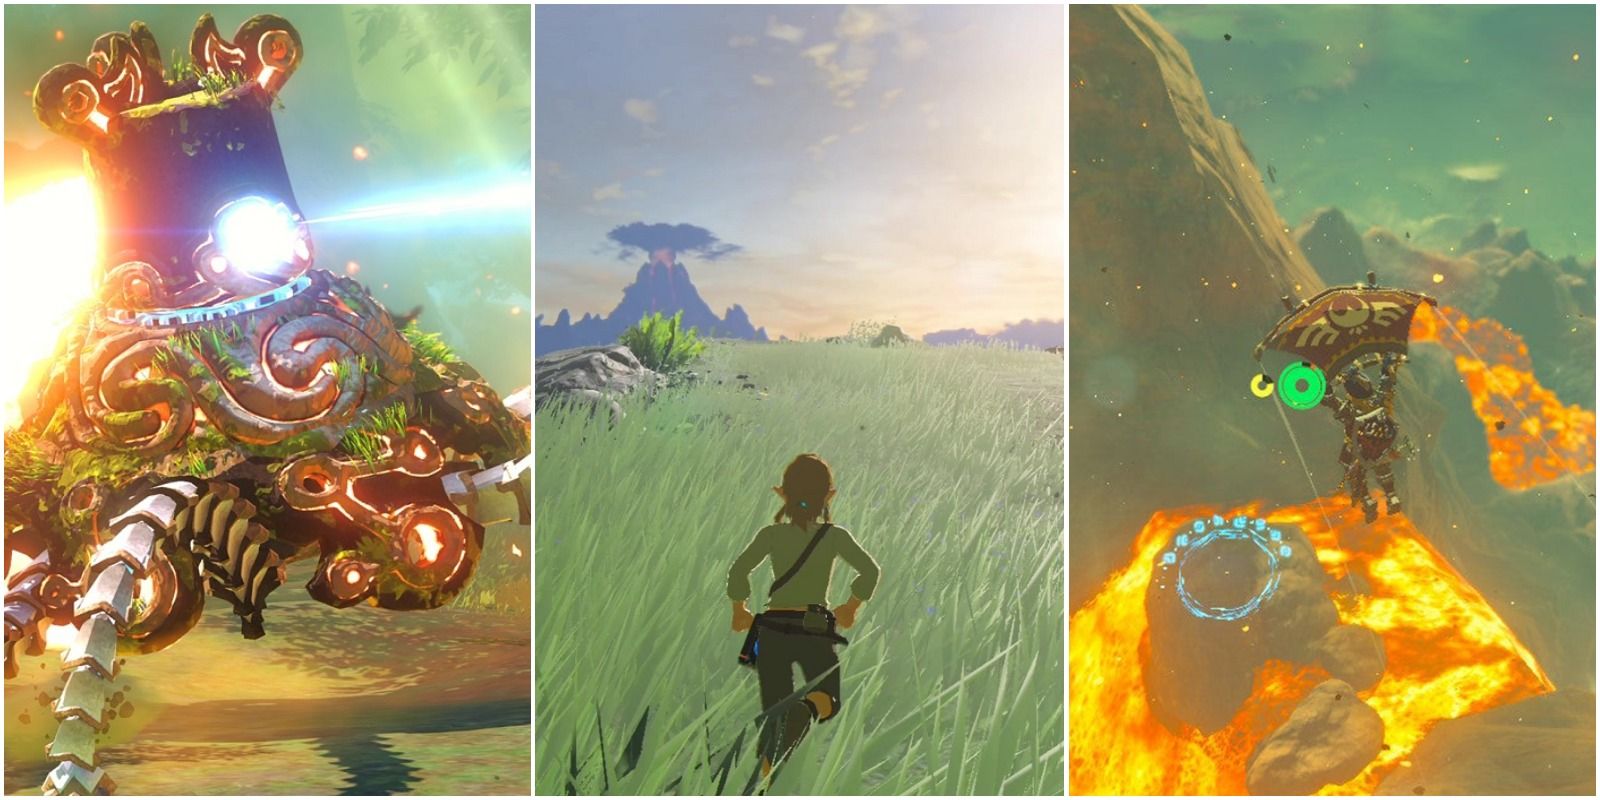 15 Things To Know Before Starting The Legend of Zelda: Breath of the Wild